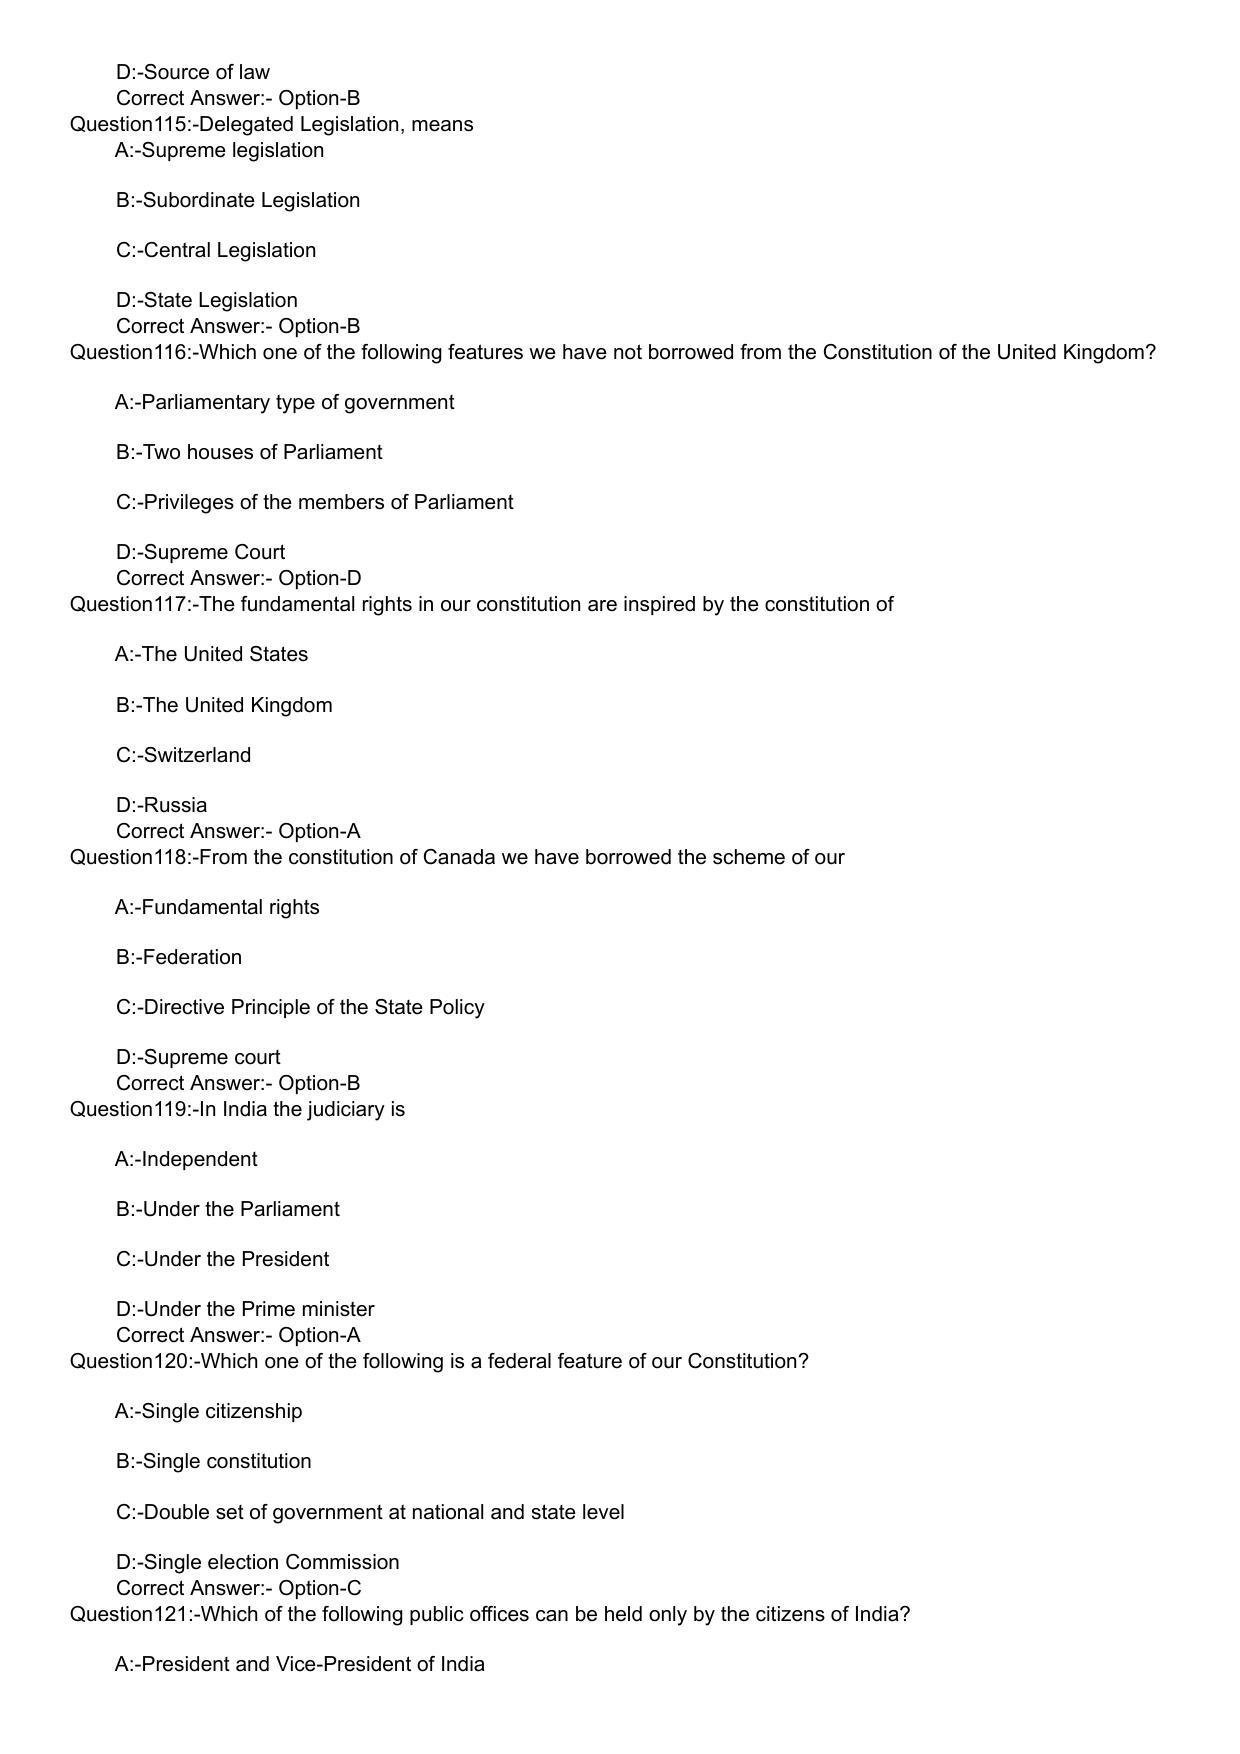 KLEE 5 Year LLB Exam 2020 Question Paper - Page 21